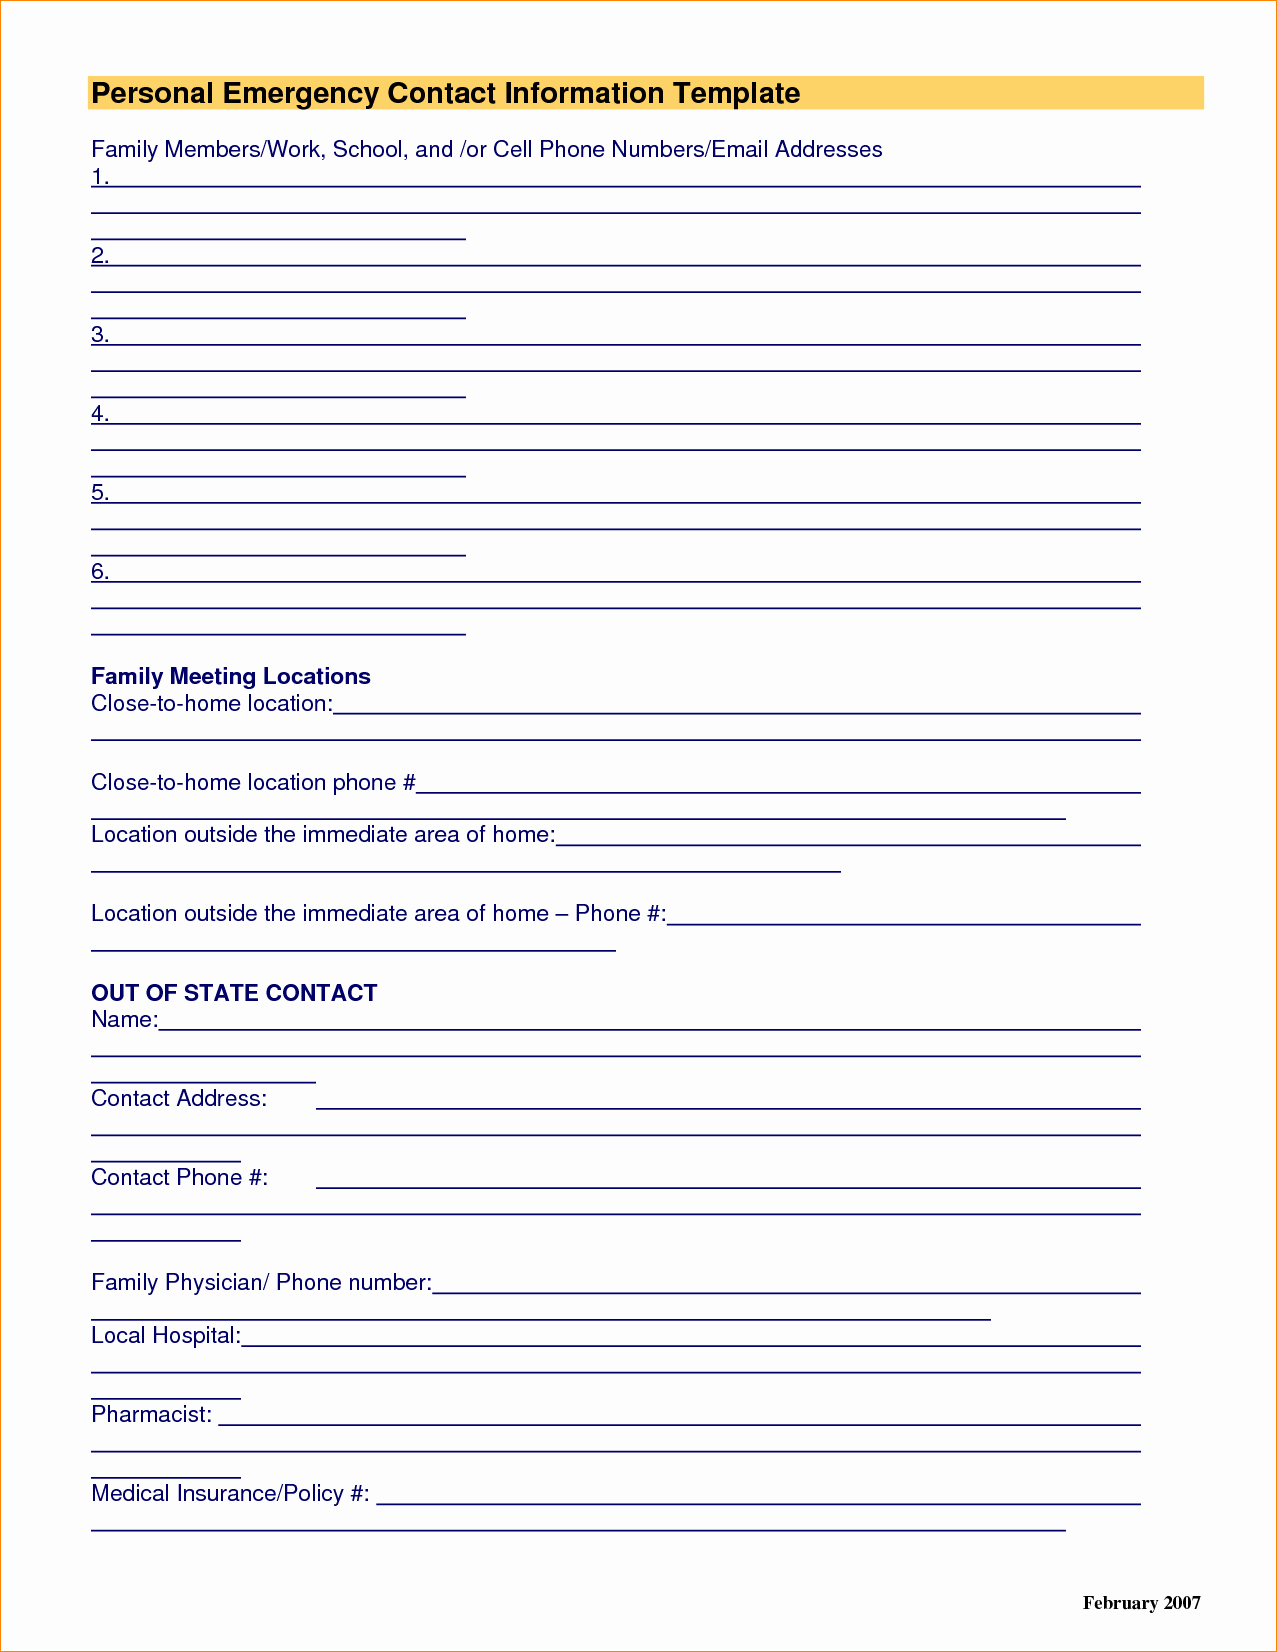 Contact Information form Template Luxury Personal Information Template Portablegasgrillweber